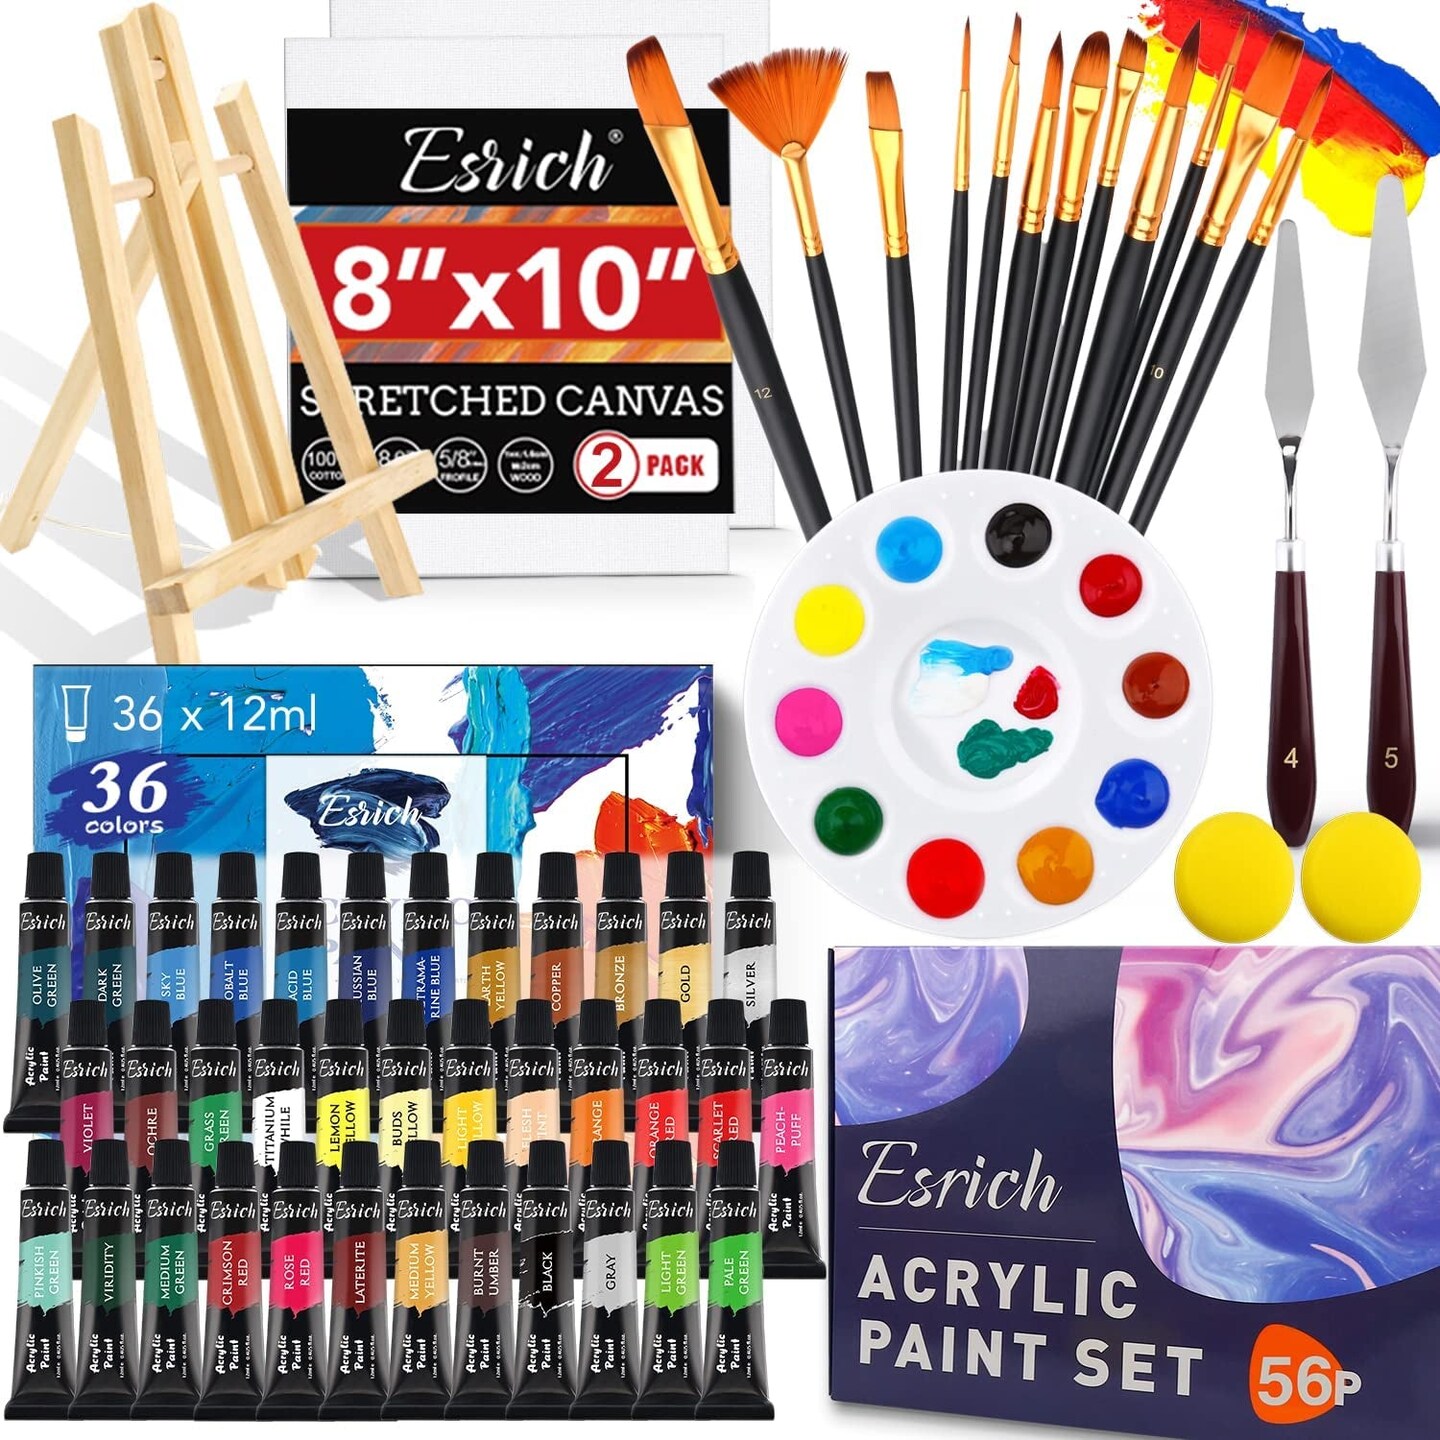 Acrylic Paint Set,57 PCS Professional Painting Supplies with Paint